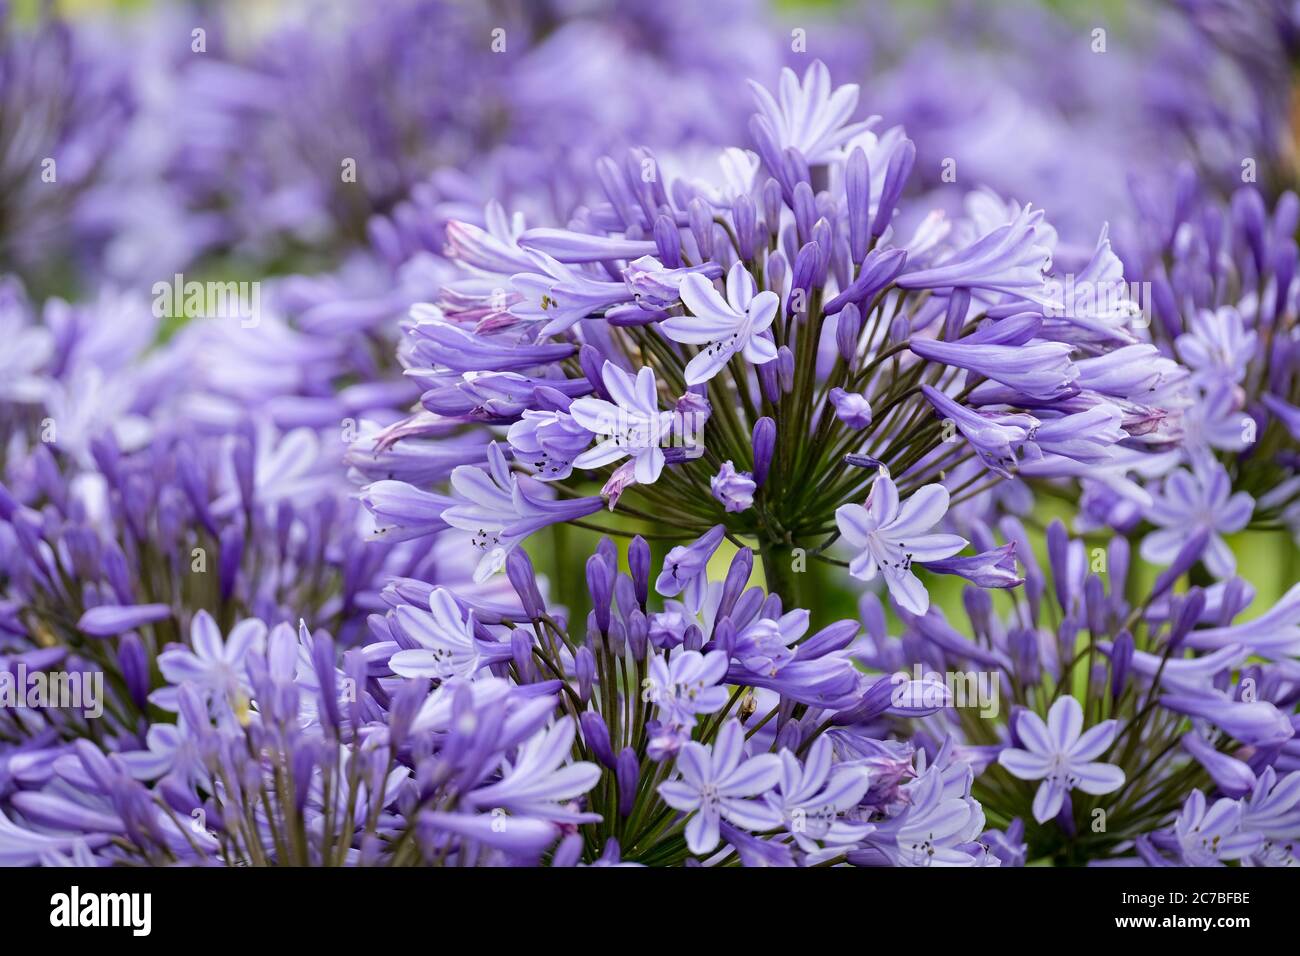 Large mid blue flower umbels of agapanthus 'Dr. Brouwer', Africa lily, African lily 'Dr. Brouwer'. Stock Photo